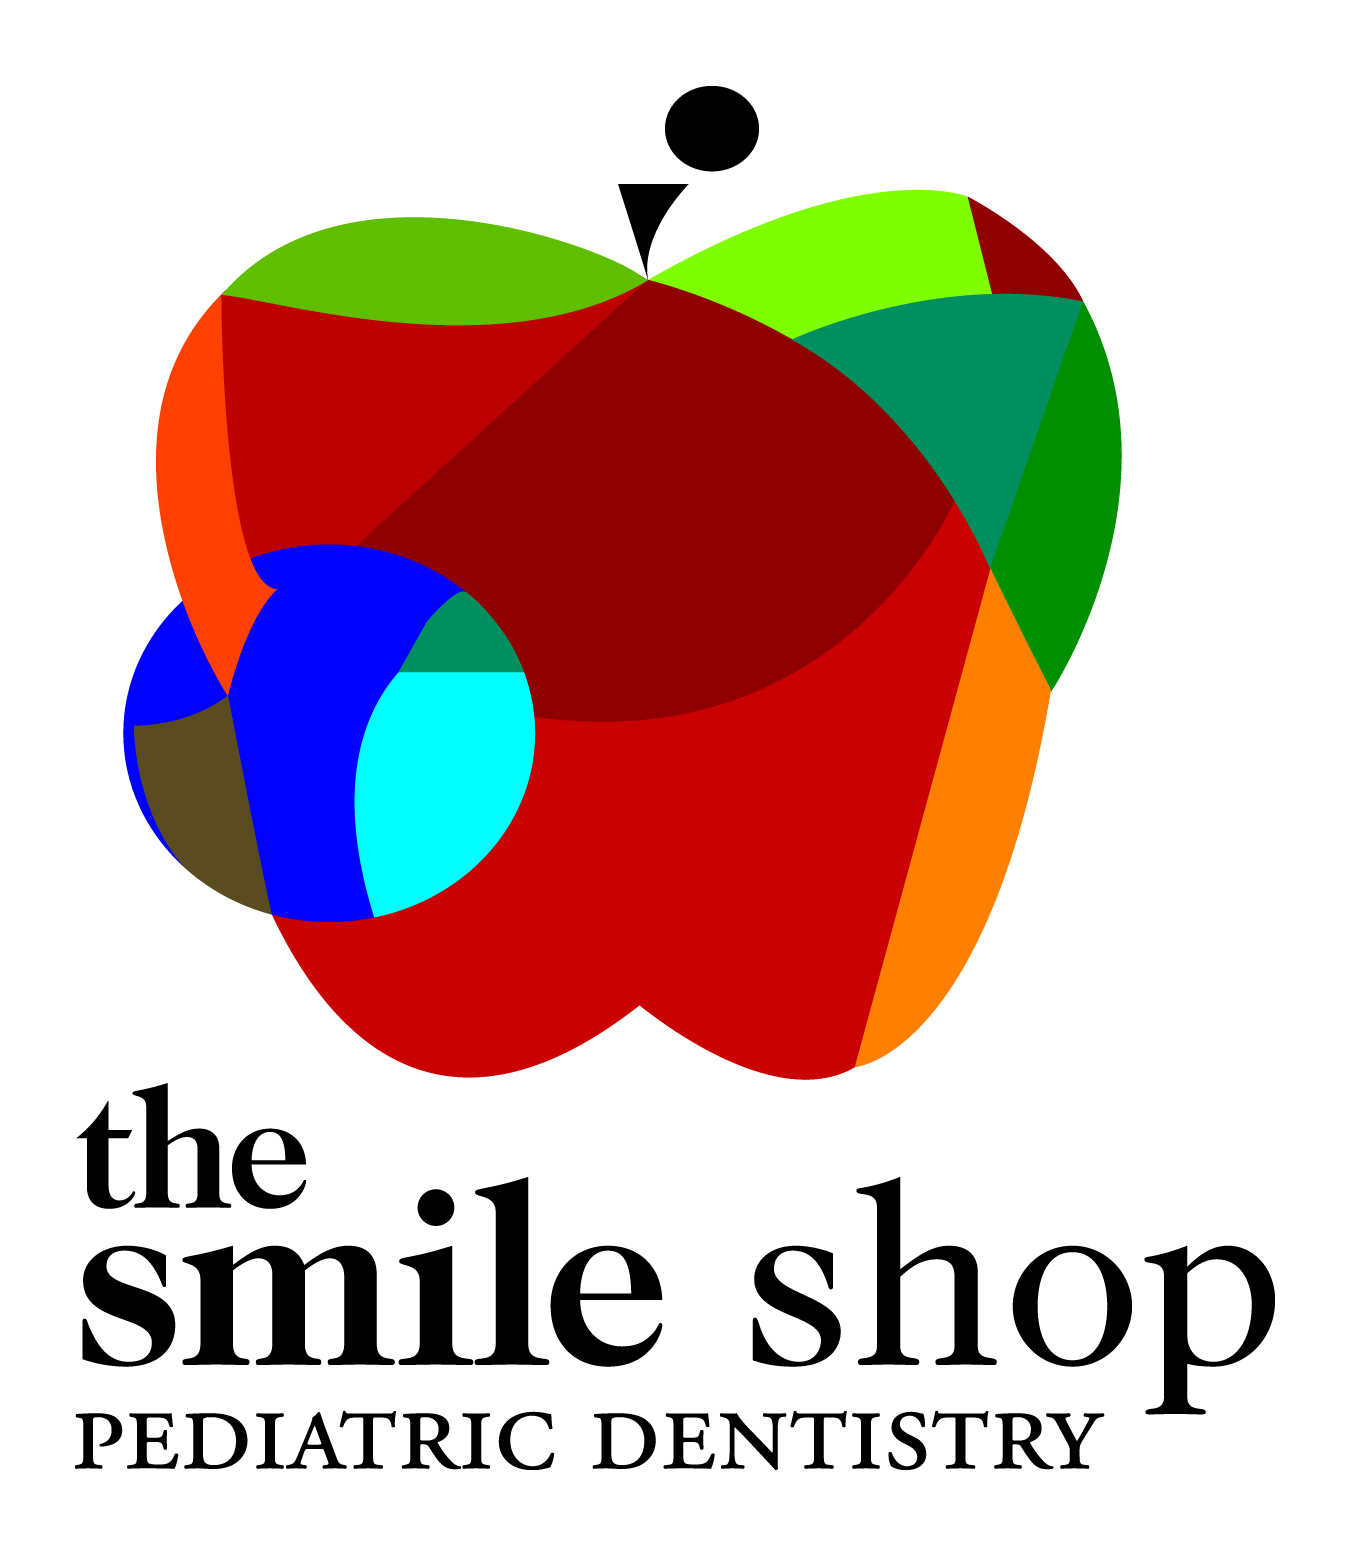 The Smile Shop Pediatric Dentistry, a locally owned practice in northern Nevada, has brought on two new doctors, Dr. Katie Foster and Dr. Whitney Garol.